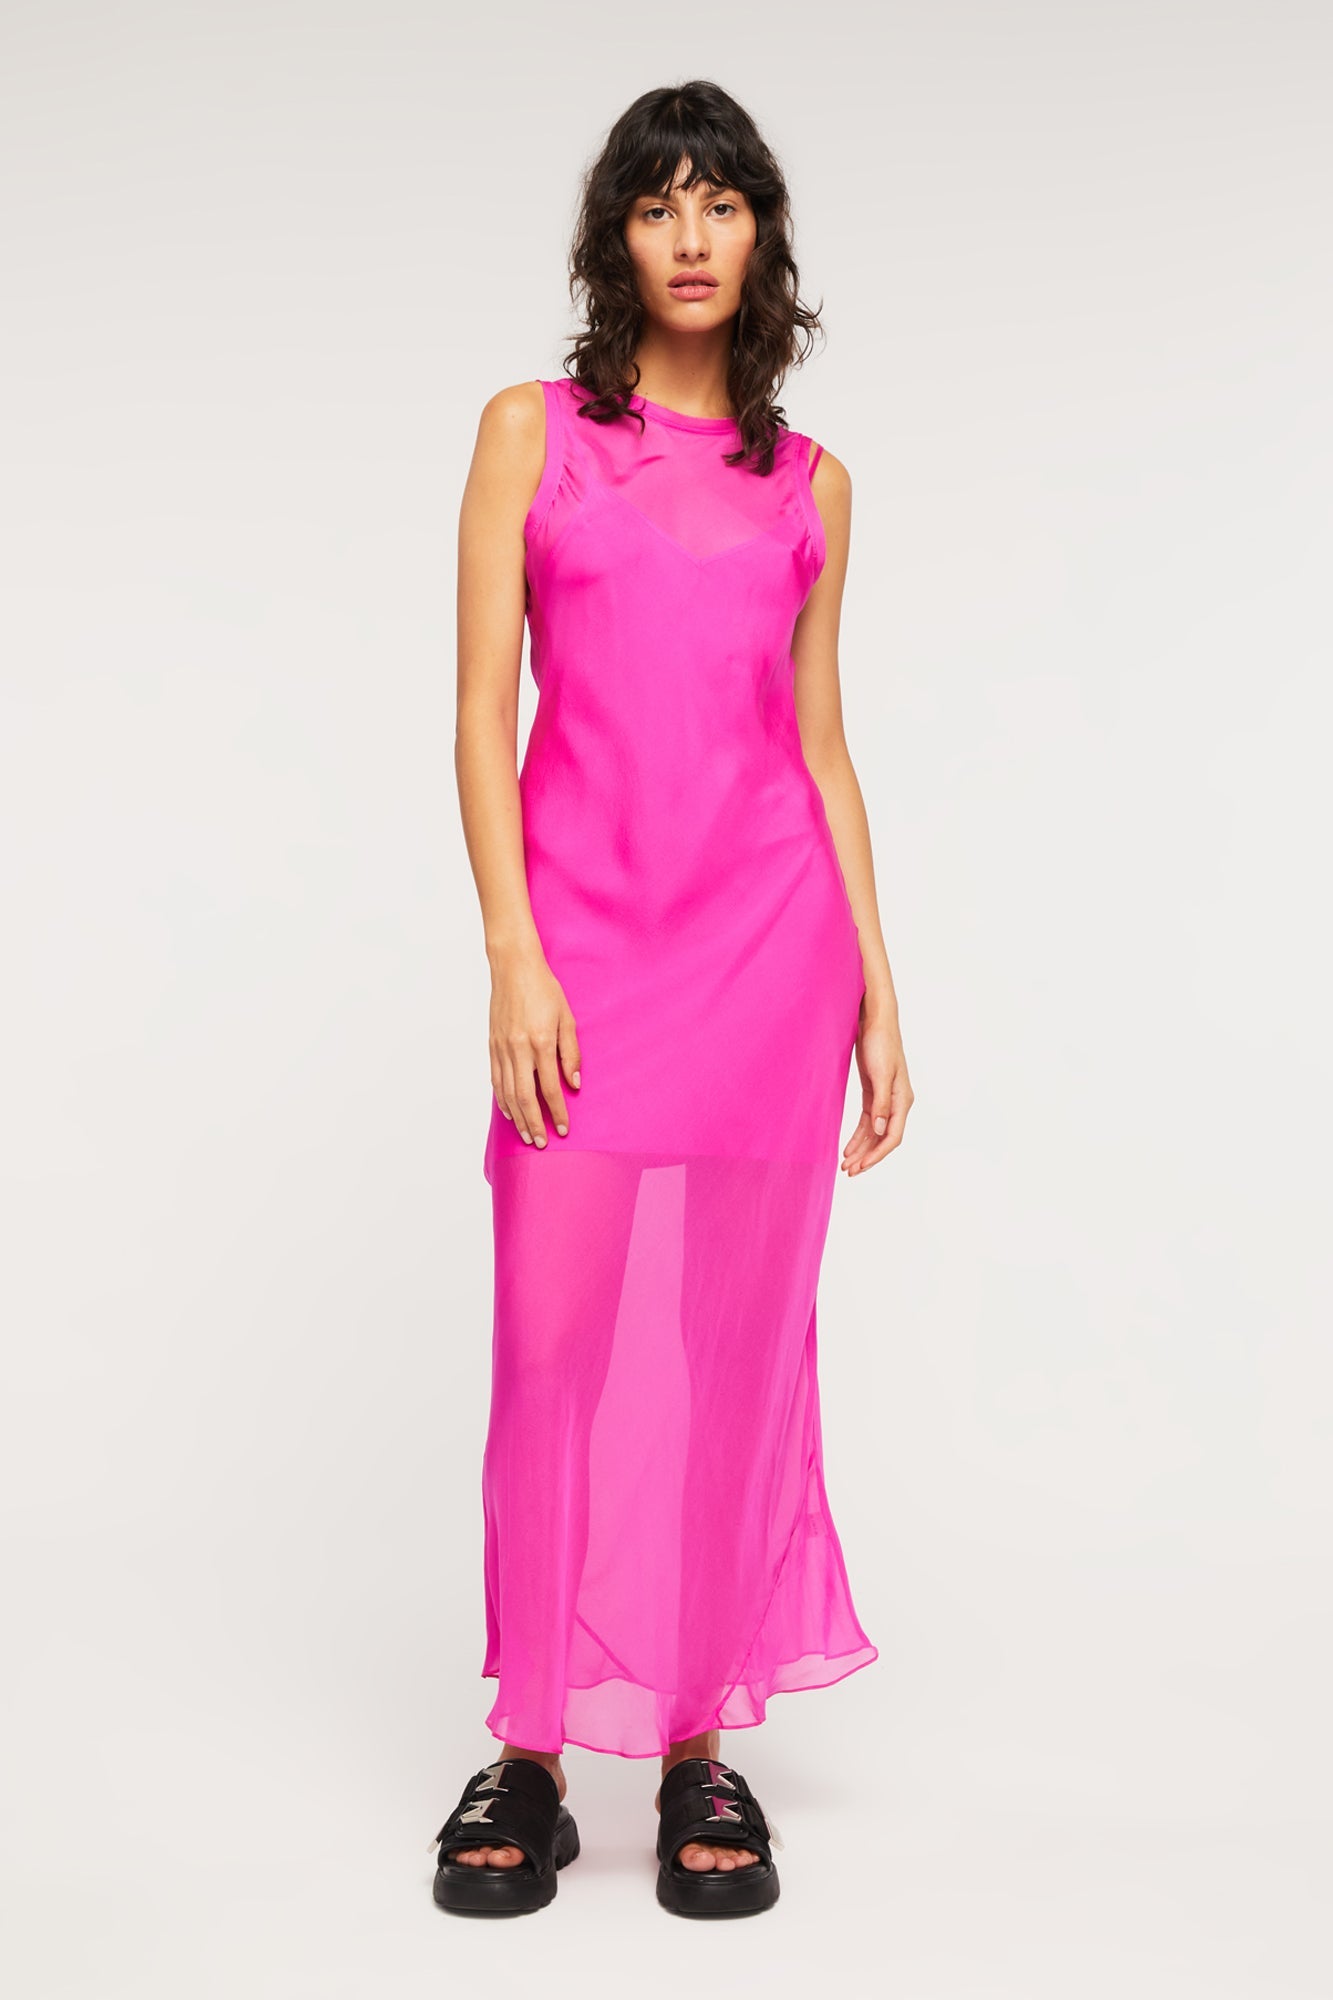 Marli Dress in Electric Pink from GINIA